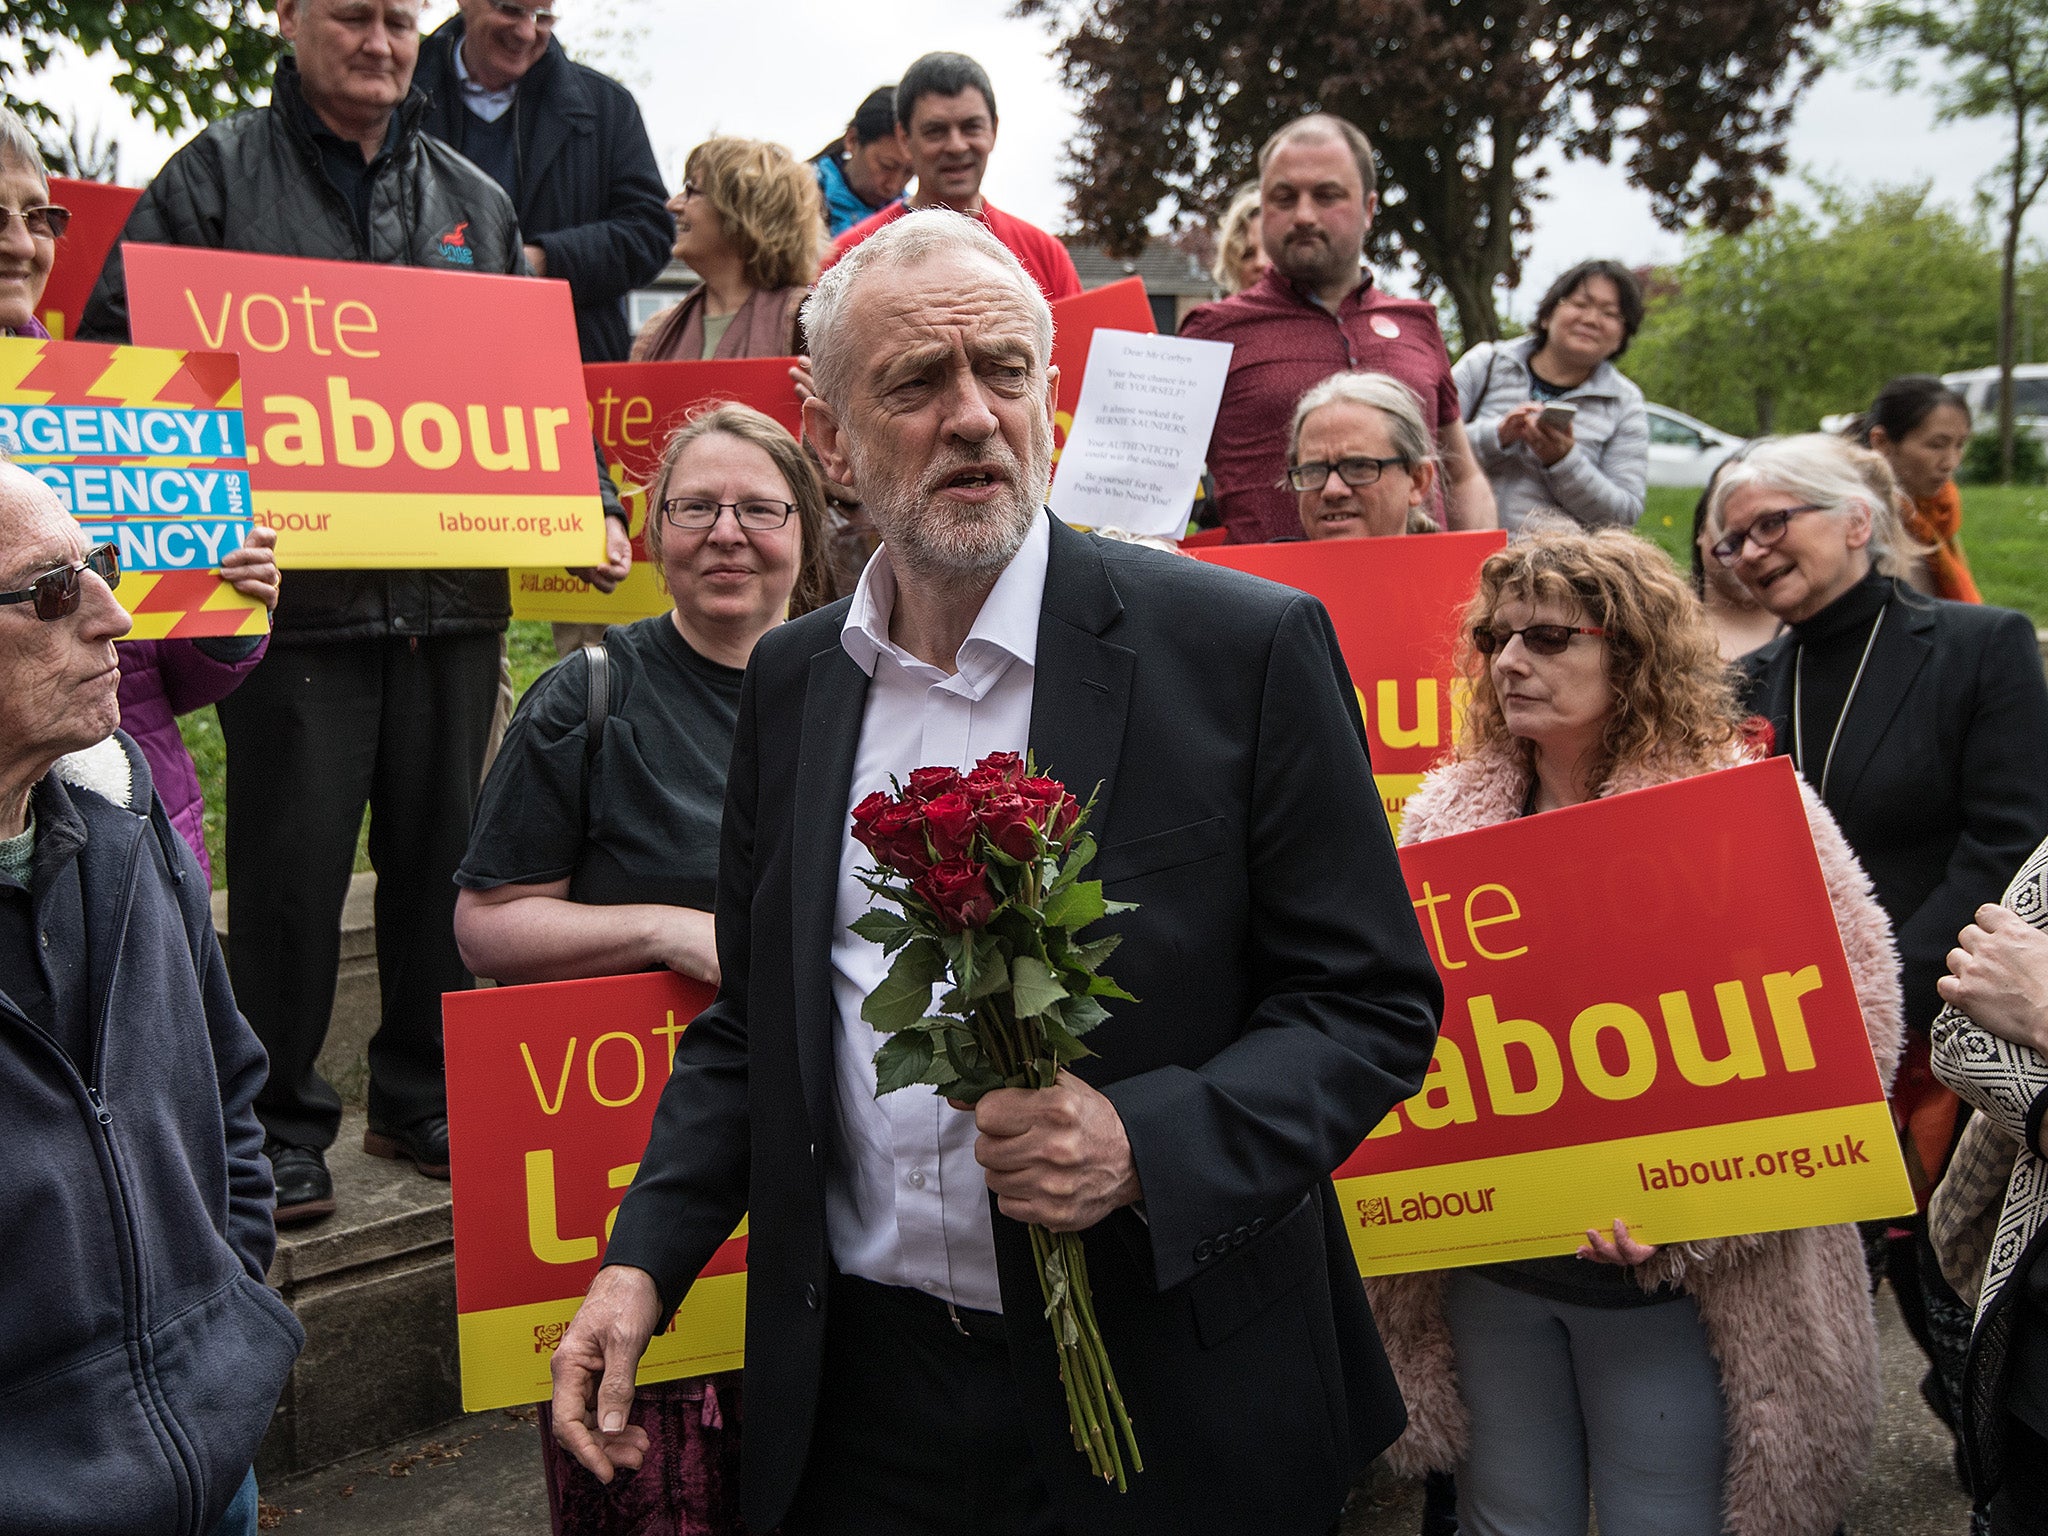 There is still a large proportion of potential voters that could be wooed by Jeremy Corbyn's Labour Party